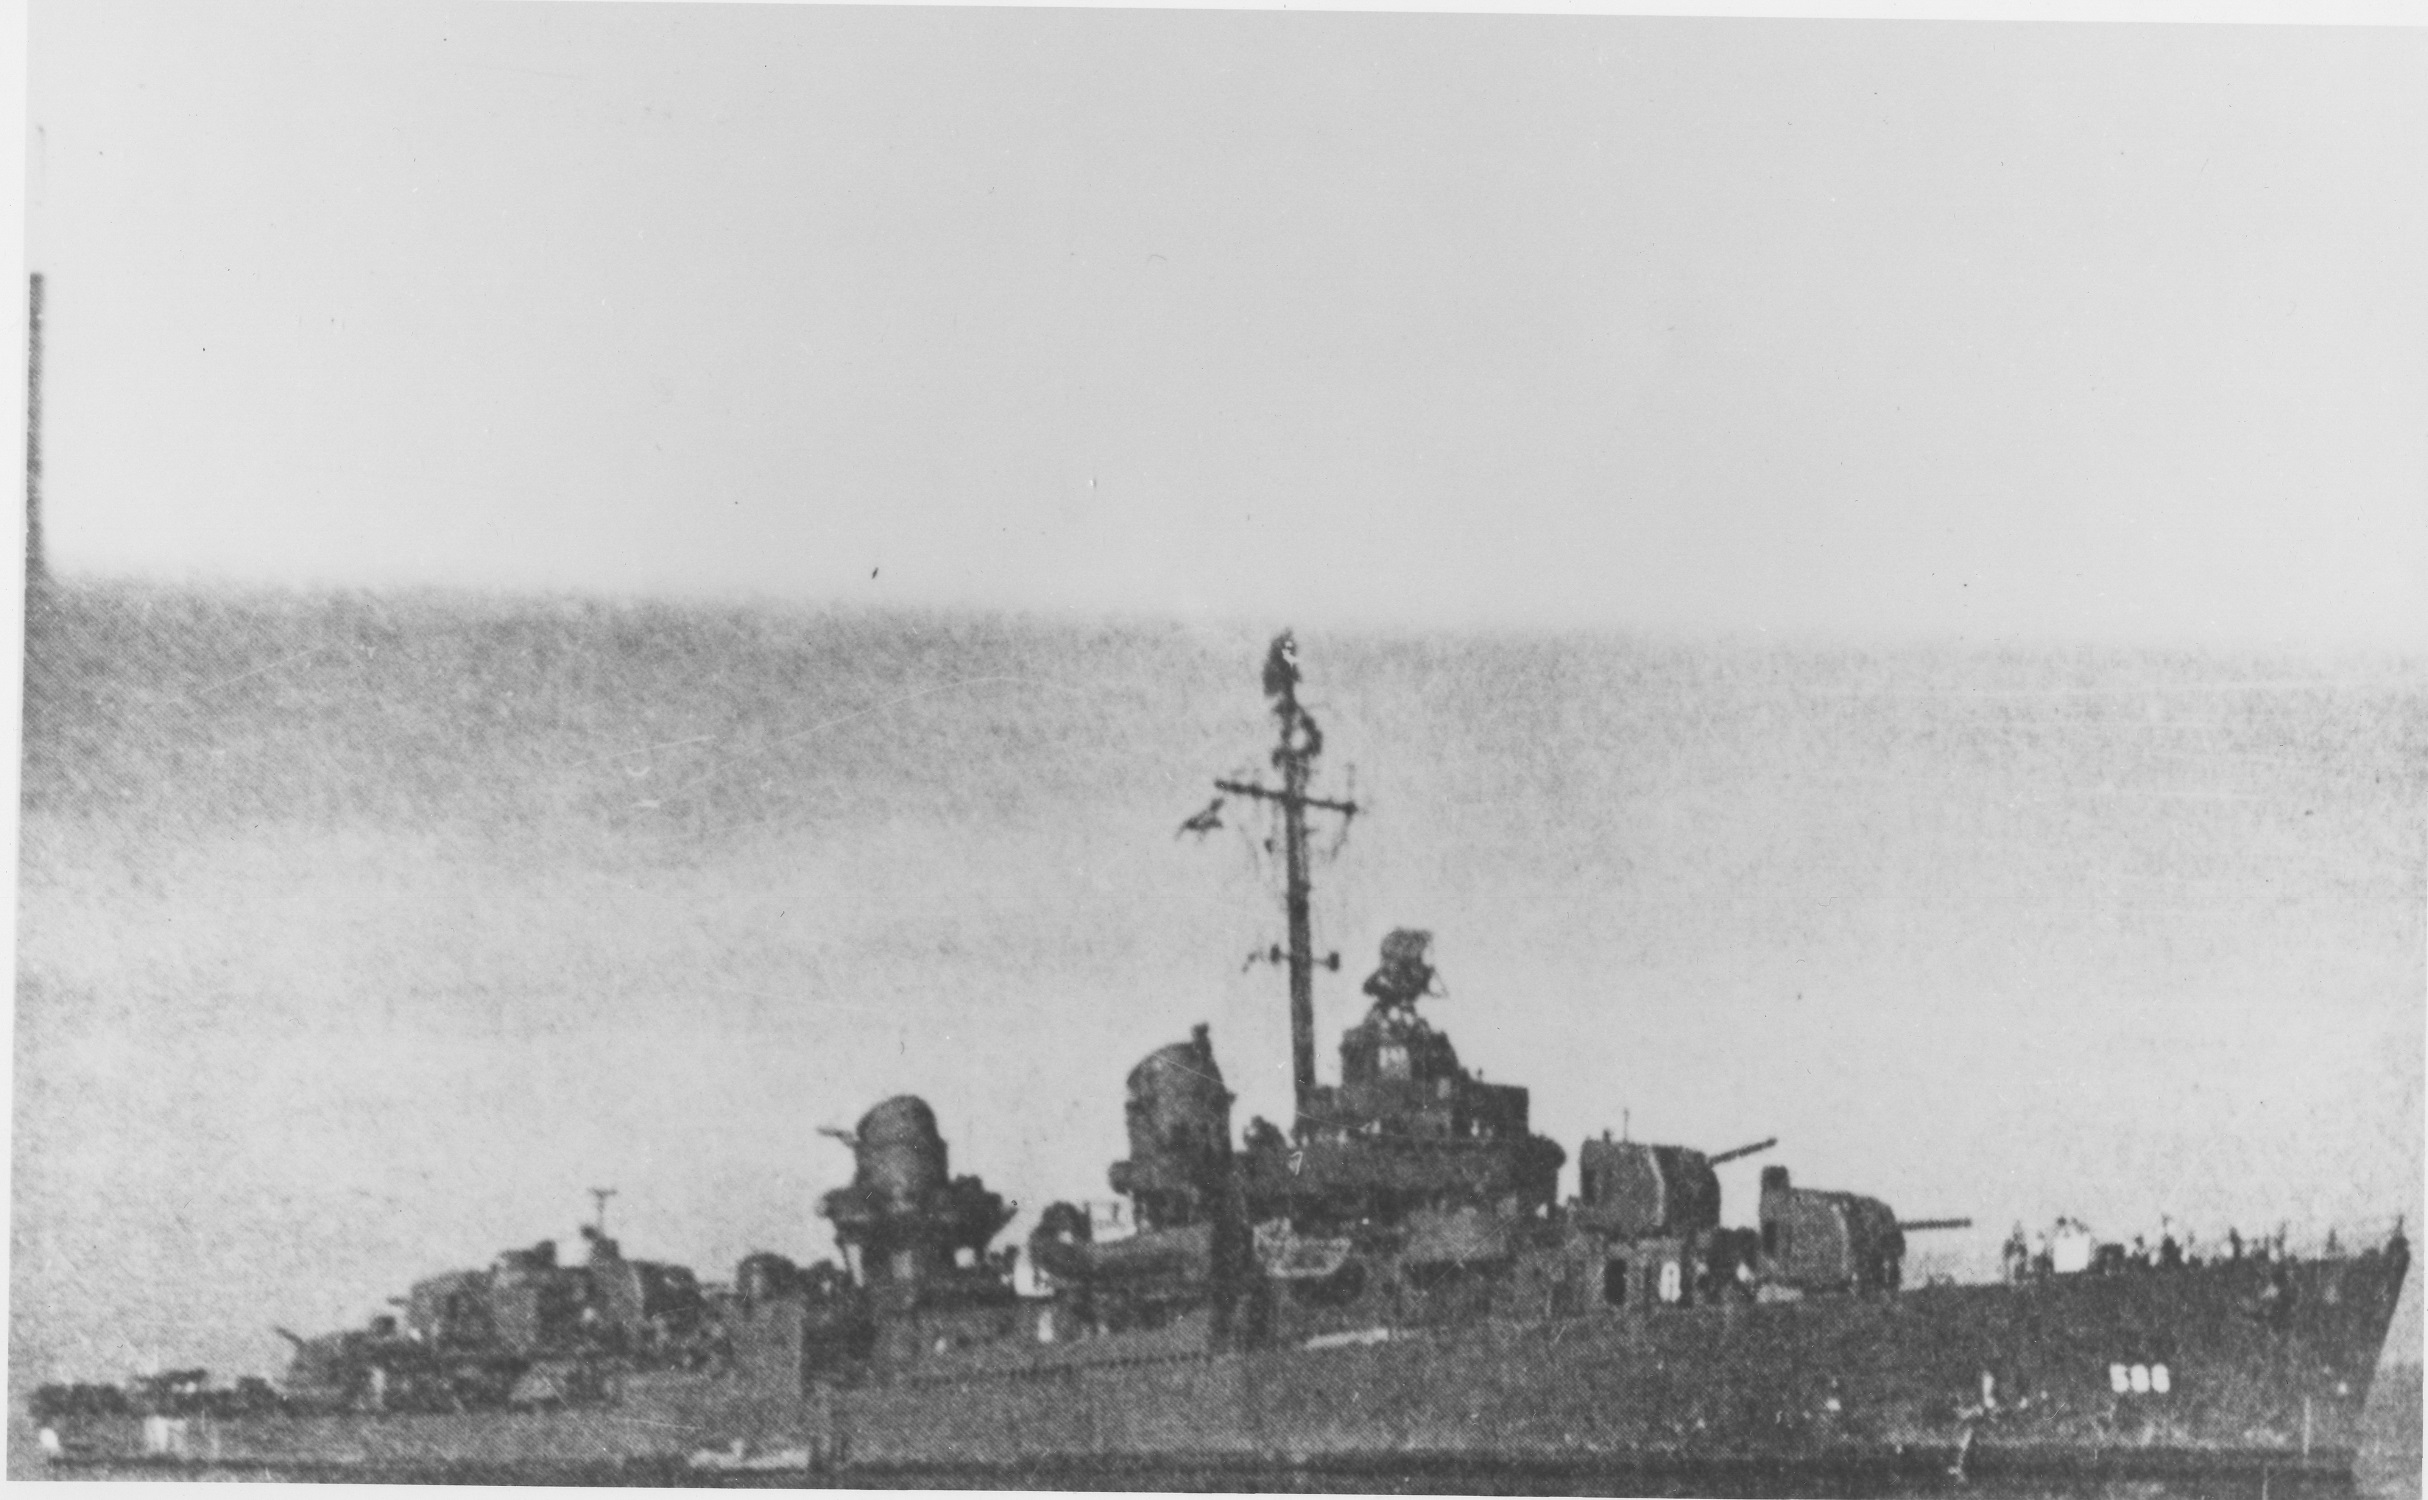 7.	When asked in 1940 to provide the name of a distinguished Coast Guard officer for a Fletcher-class destroyer, Coast Guard Commandant Russell Waesche forwarded Frank Newcomb’s name without hesitation. The destroyer enjoyed a very active operational career in World War II. During the 1945 Okinawa campaign, the ship suffered several kamikaze strikes; however, the crew kept the ship afloat and she survived the war. (U.S. Navy photo)